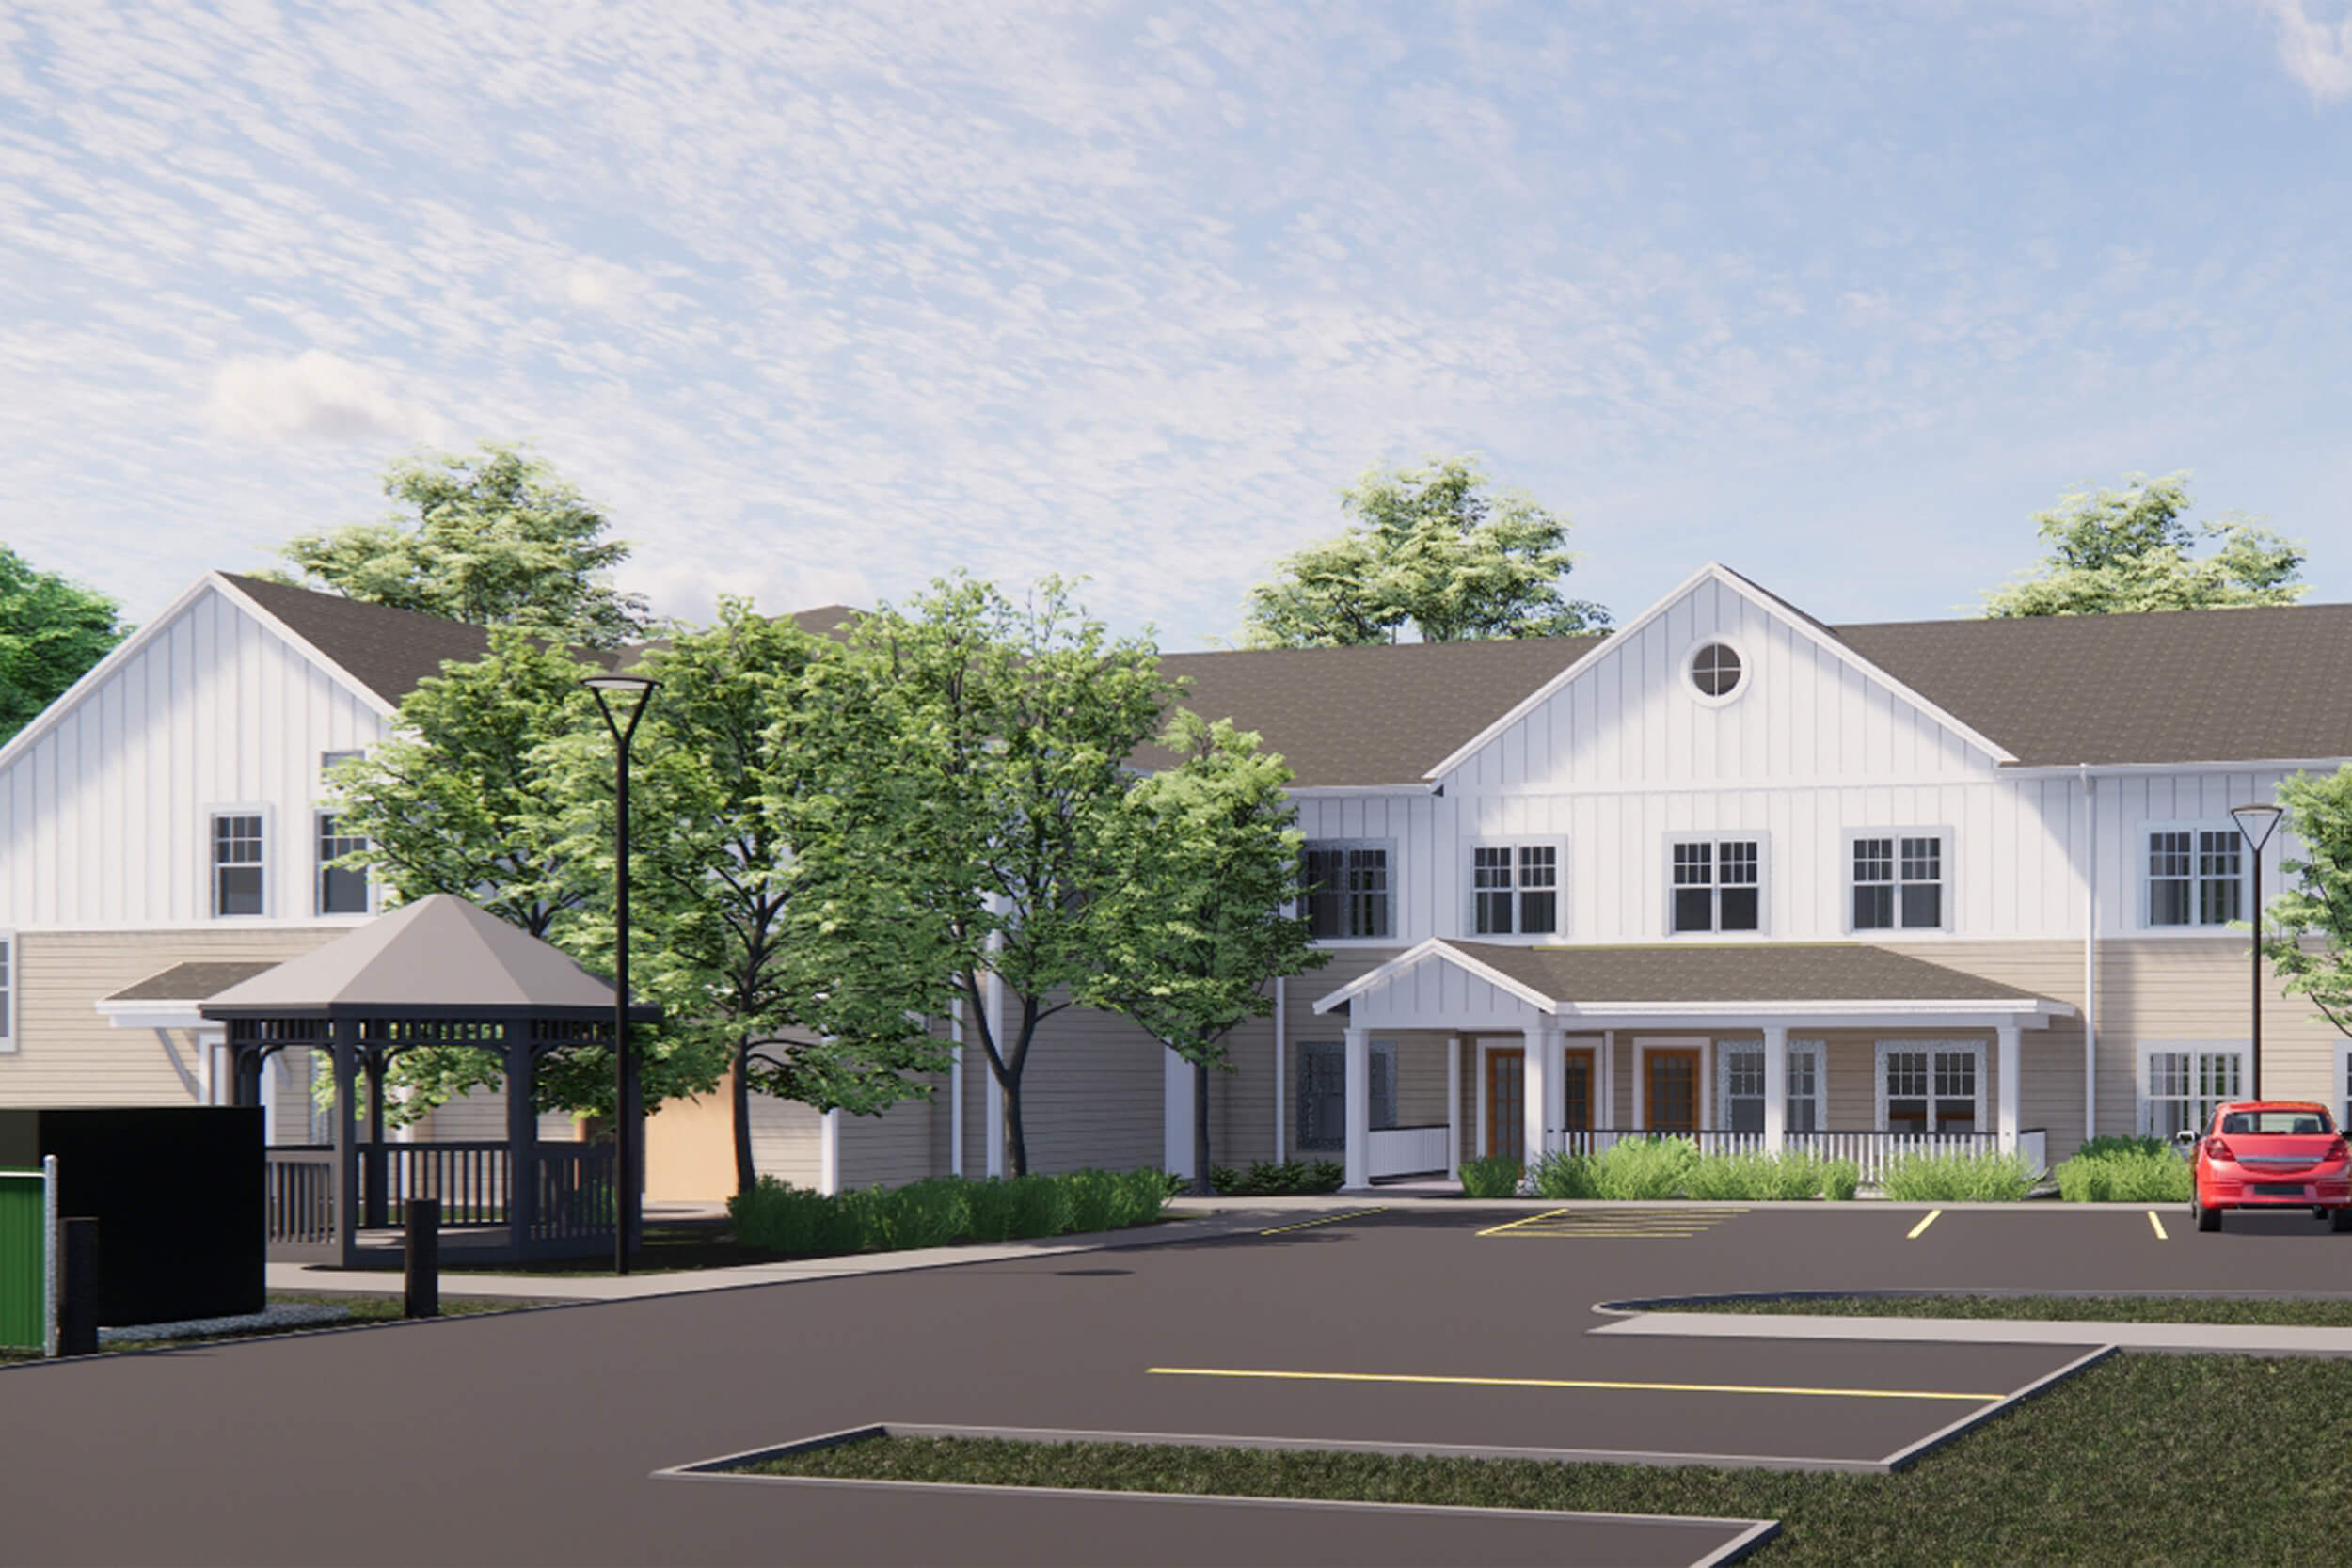 Rendering of the exterior of a senior living facility, Avesta Meadowview - a white building surrounded by parking lot and trees.